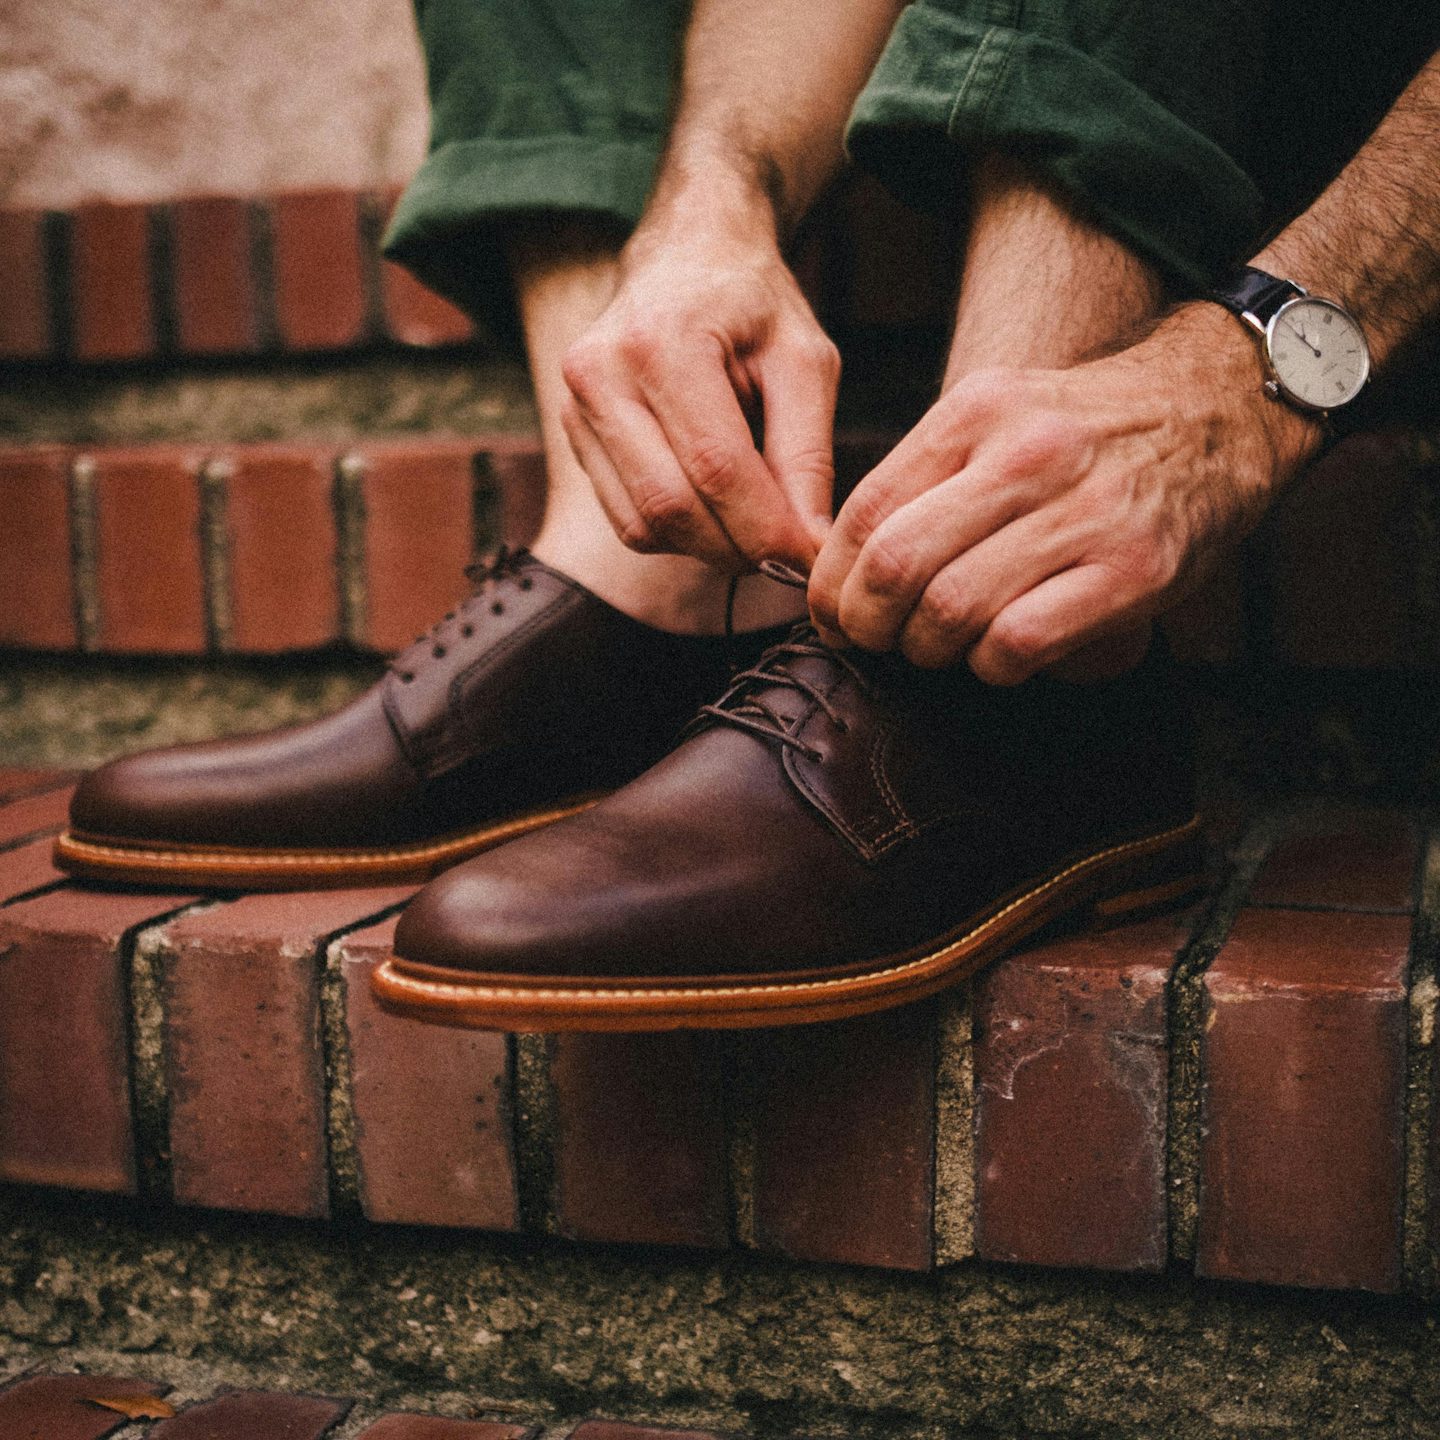 Plain Toe Blucher - Brown Chromexcel, Leather Sole with Dovetail ...